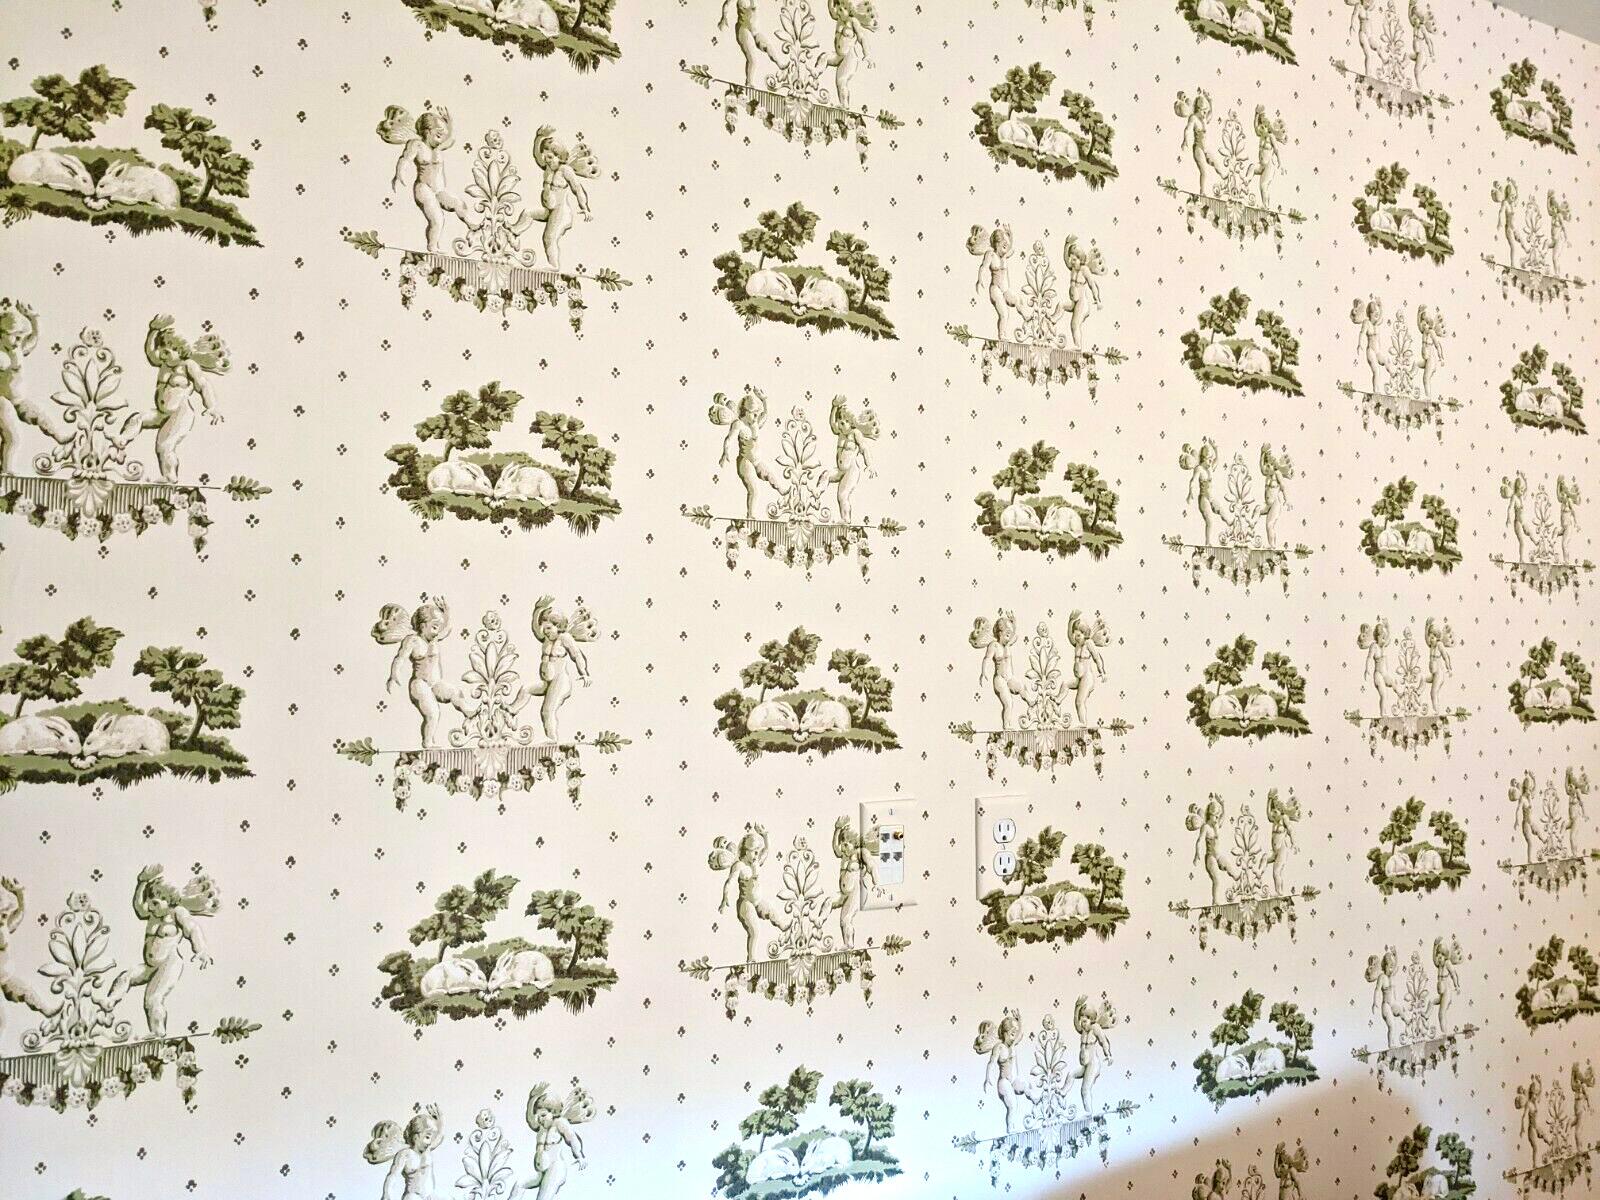 Brunschwig & Fils hand-printed Cherubin et Lapins, wallpaper, angels and rabbits, 2000. Vintage, rare, out of print design featuring alternating scenes of rabbits and cherubs surrounded by trees and greenery including acanthus leaves. This listing